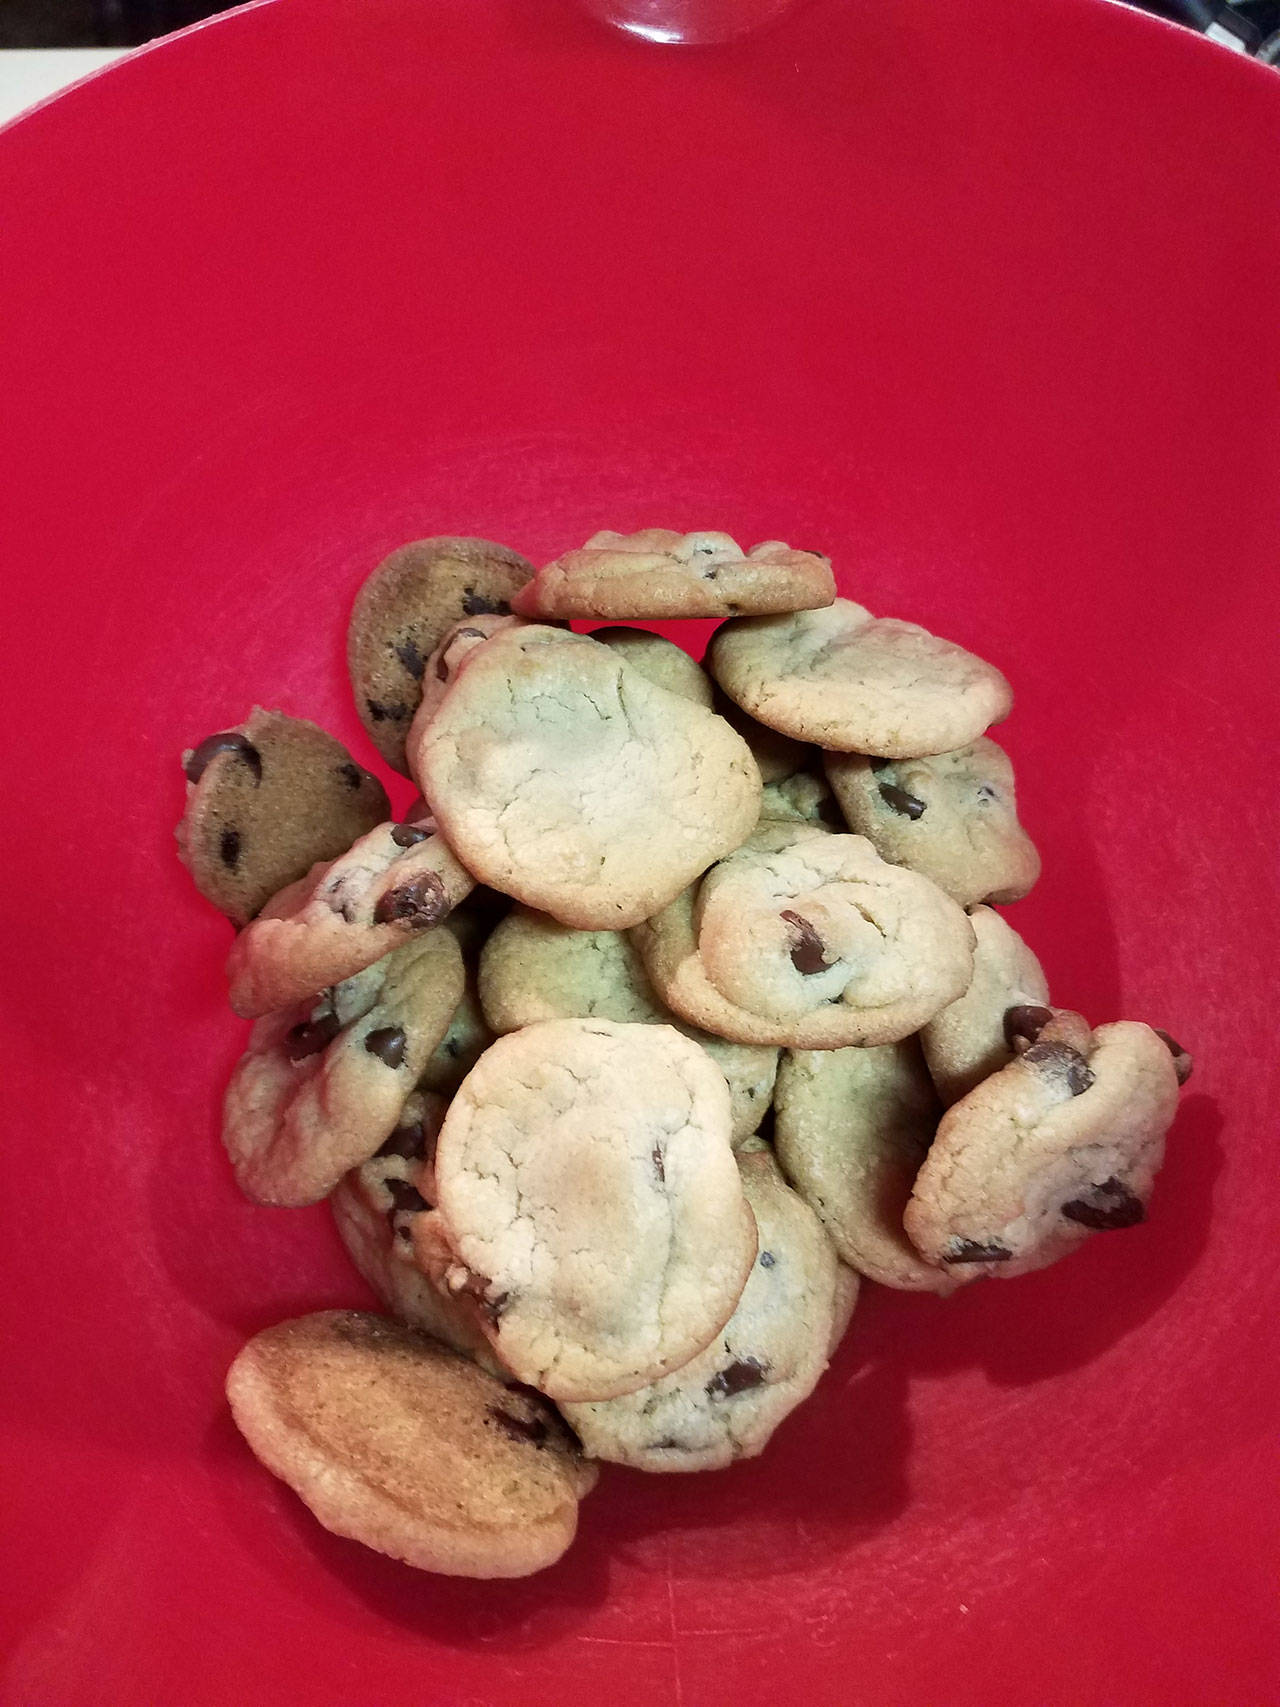 Bite-size chocolate chip cookies sit in a bowl, ready to be devoured. (Emily Hanson/Peninsula Daily News)